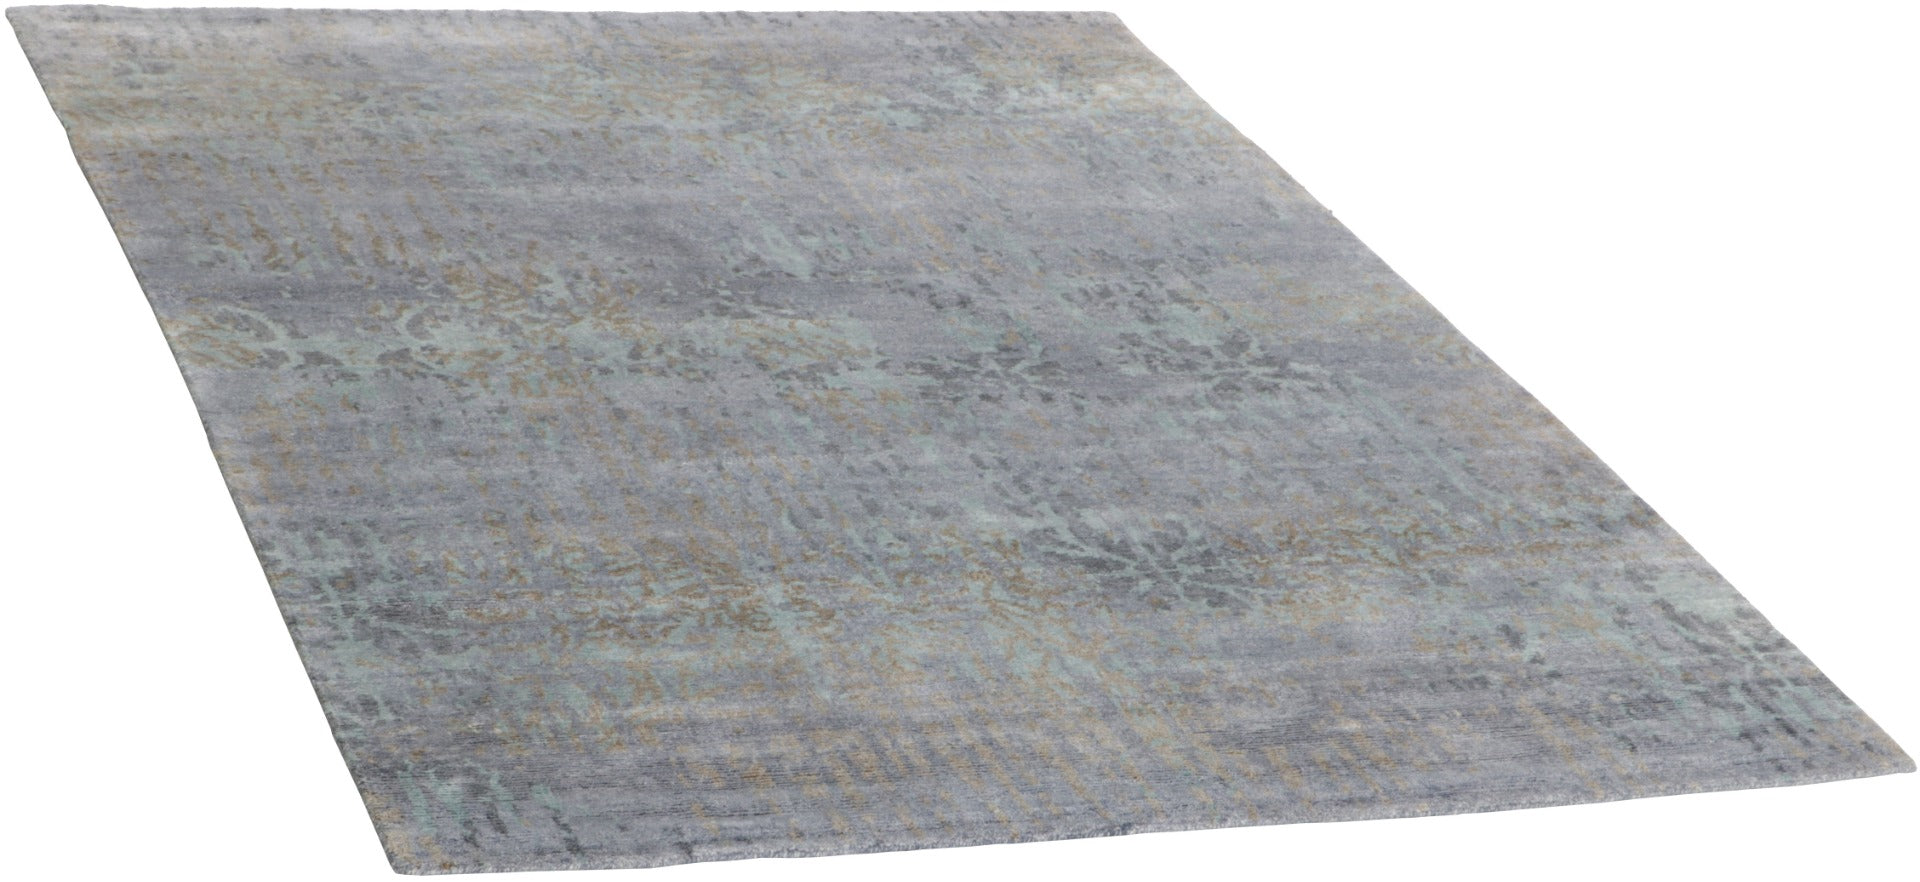 Area rug with  abstract design in grey